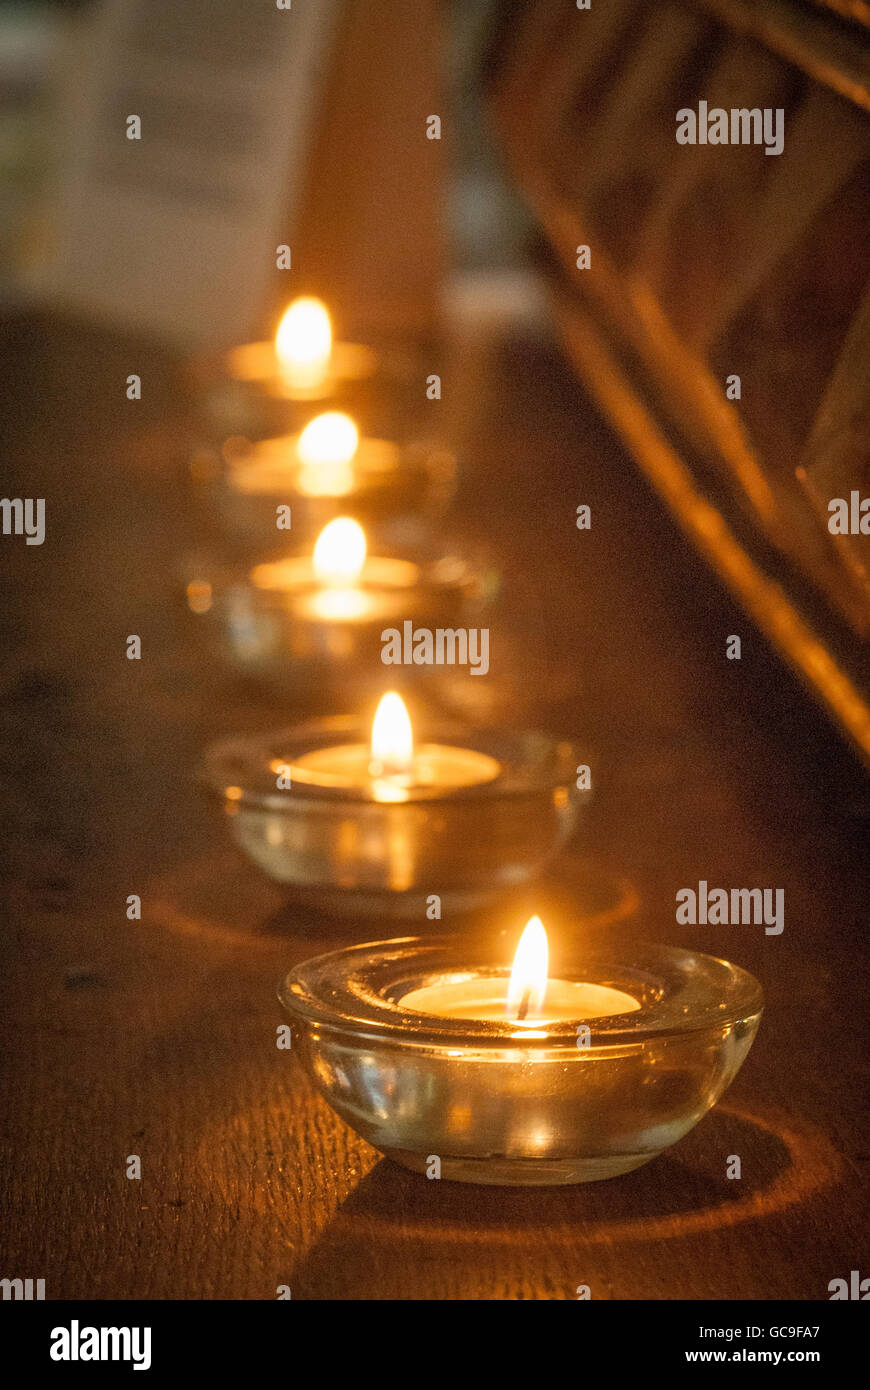 Tea light candles in a row Stock Photo